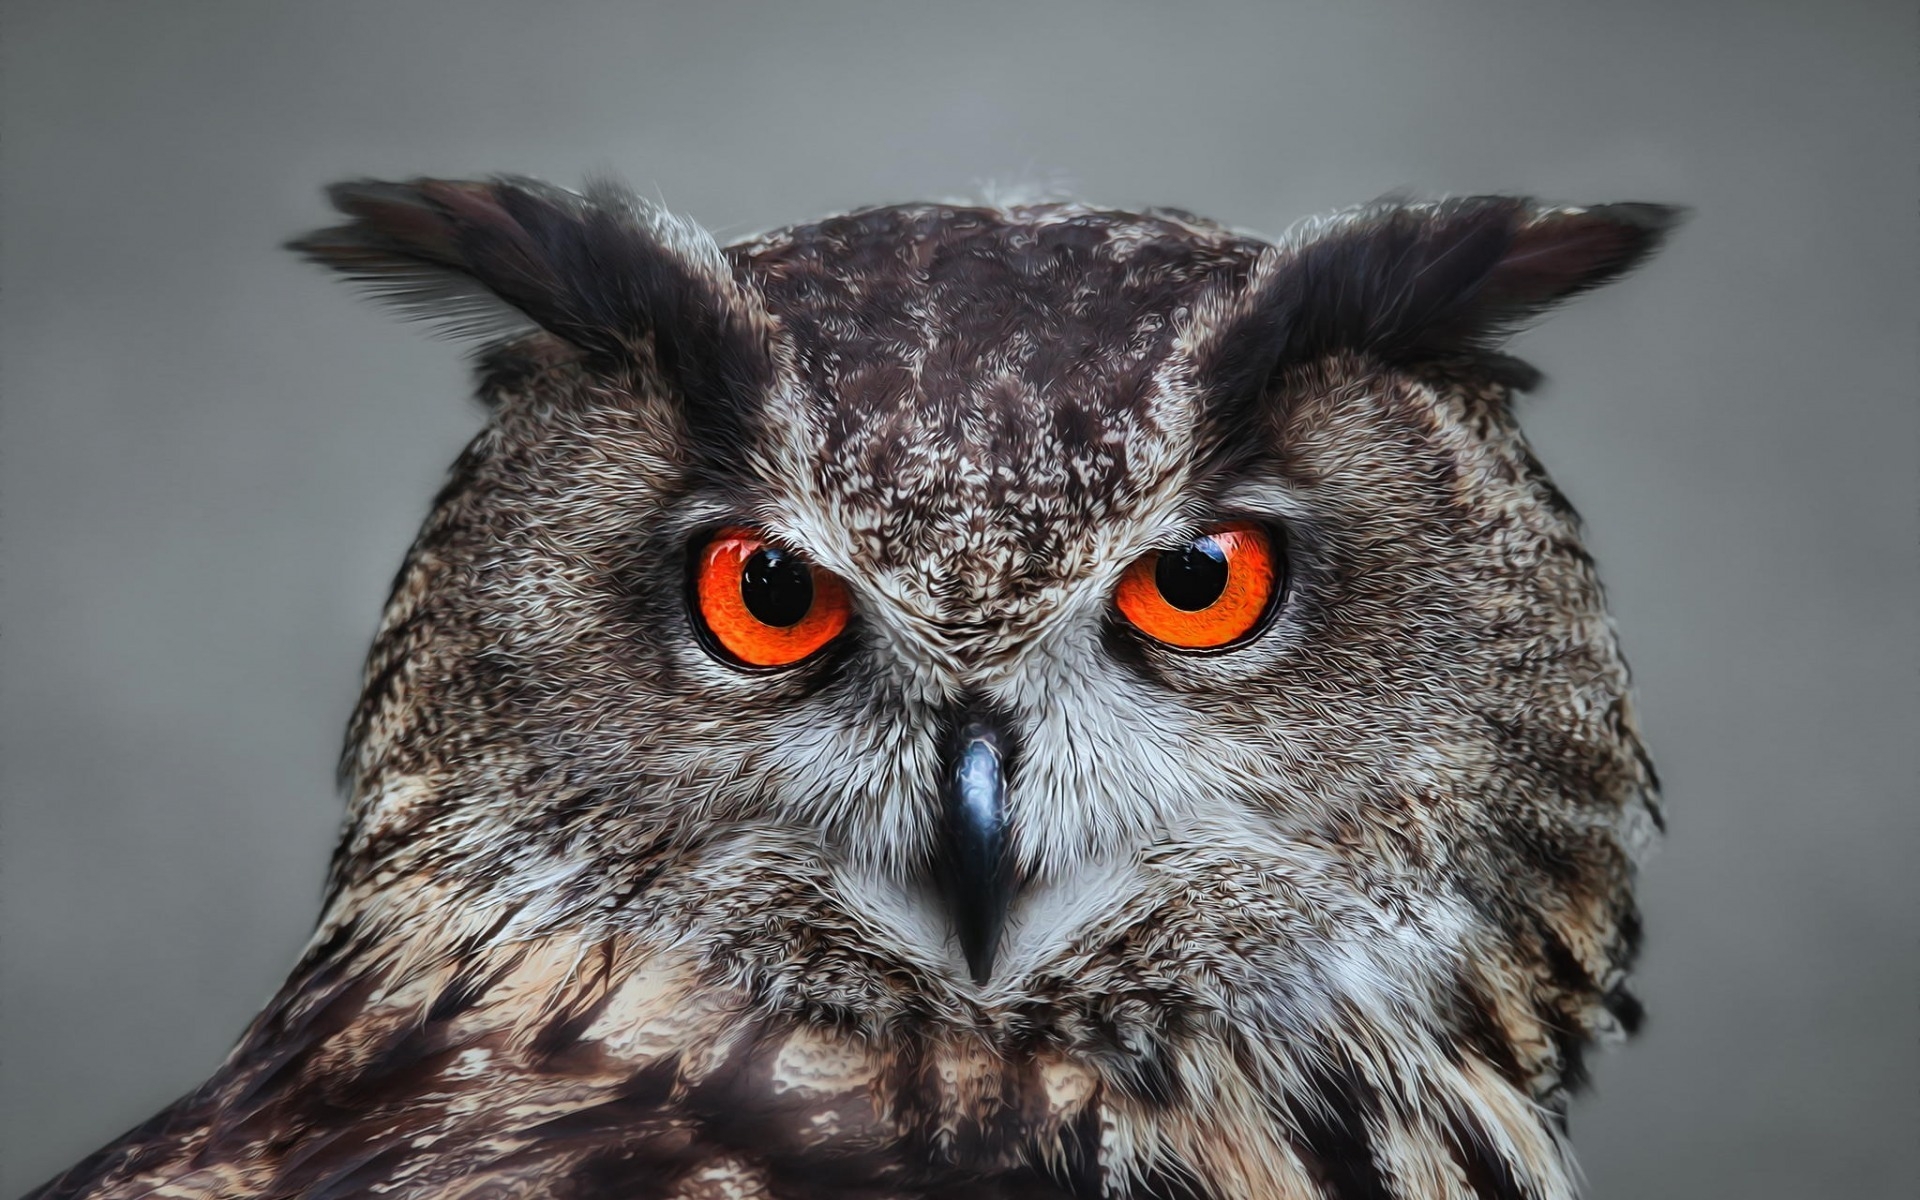 Cool Owl Eyes Wallpaper for Computer.